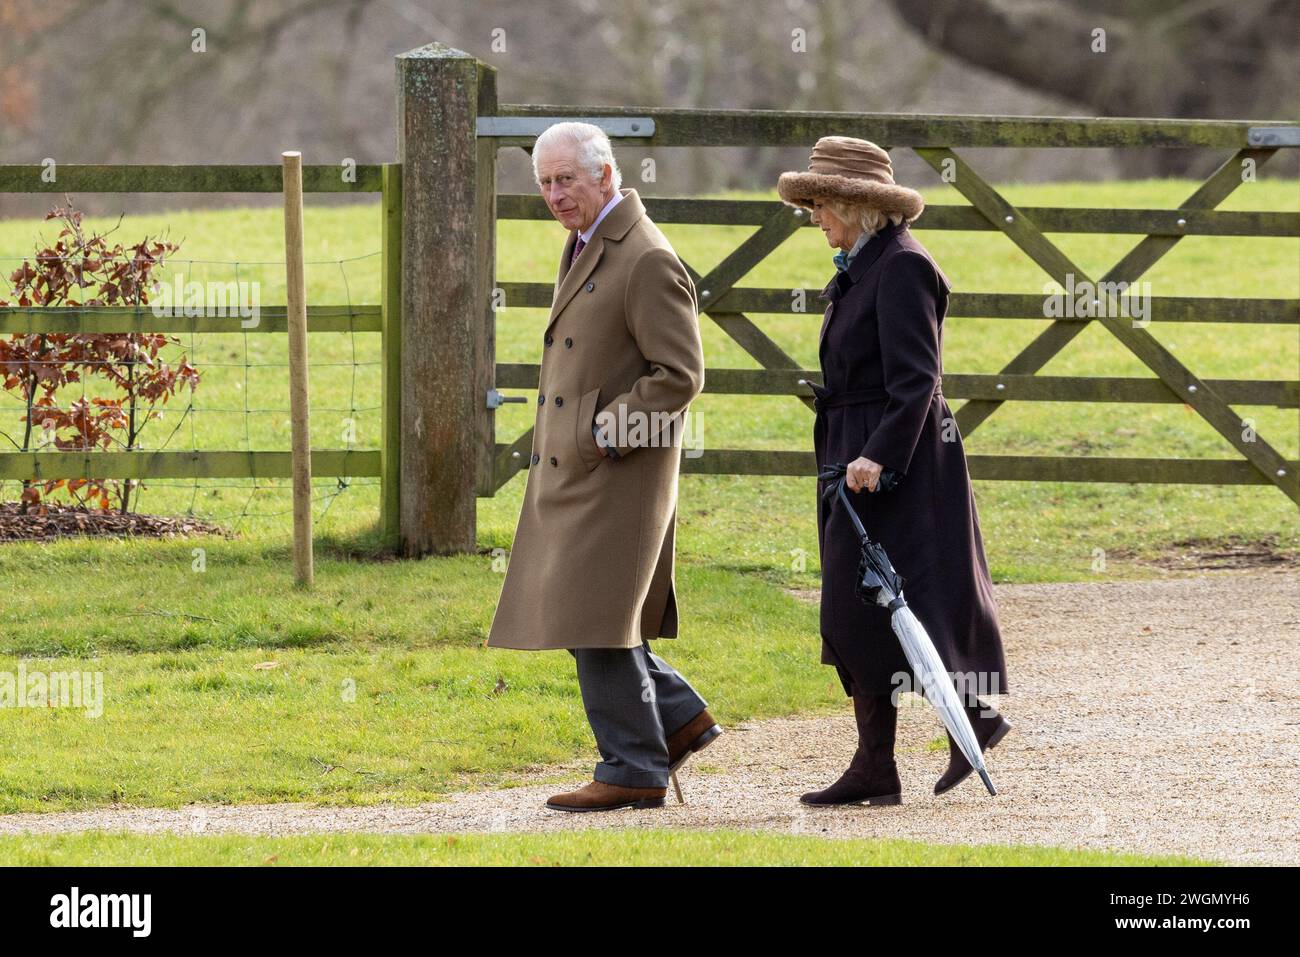 Pic dated Feb 4th shows last images of King Charles and Queen Camilla  at church in Sandringham,Norfolk before cancer diagnosis. Stock Photo